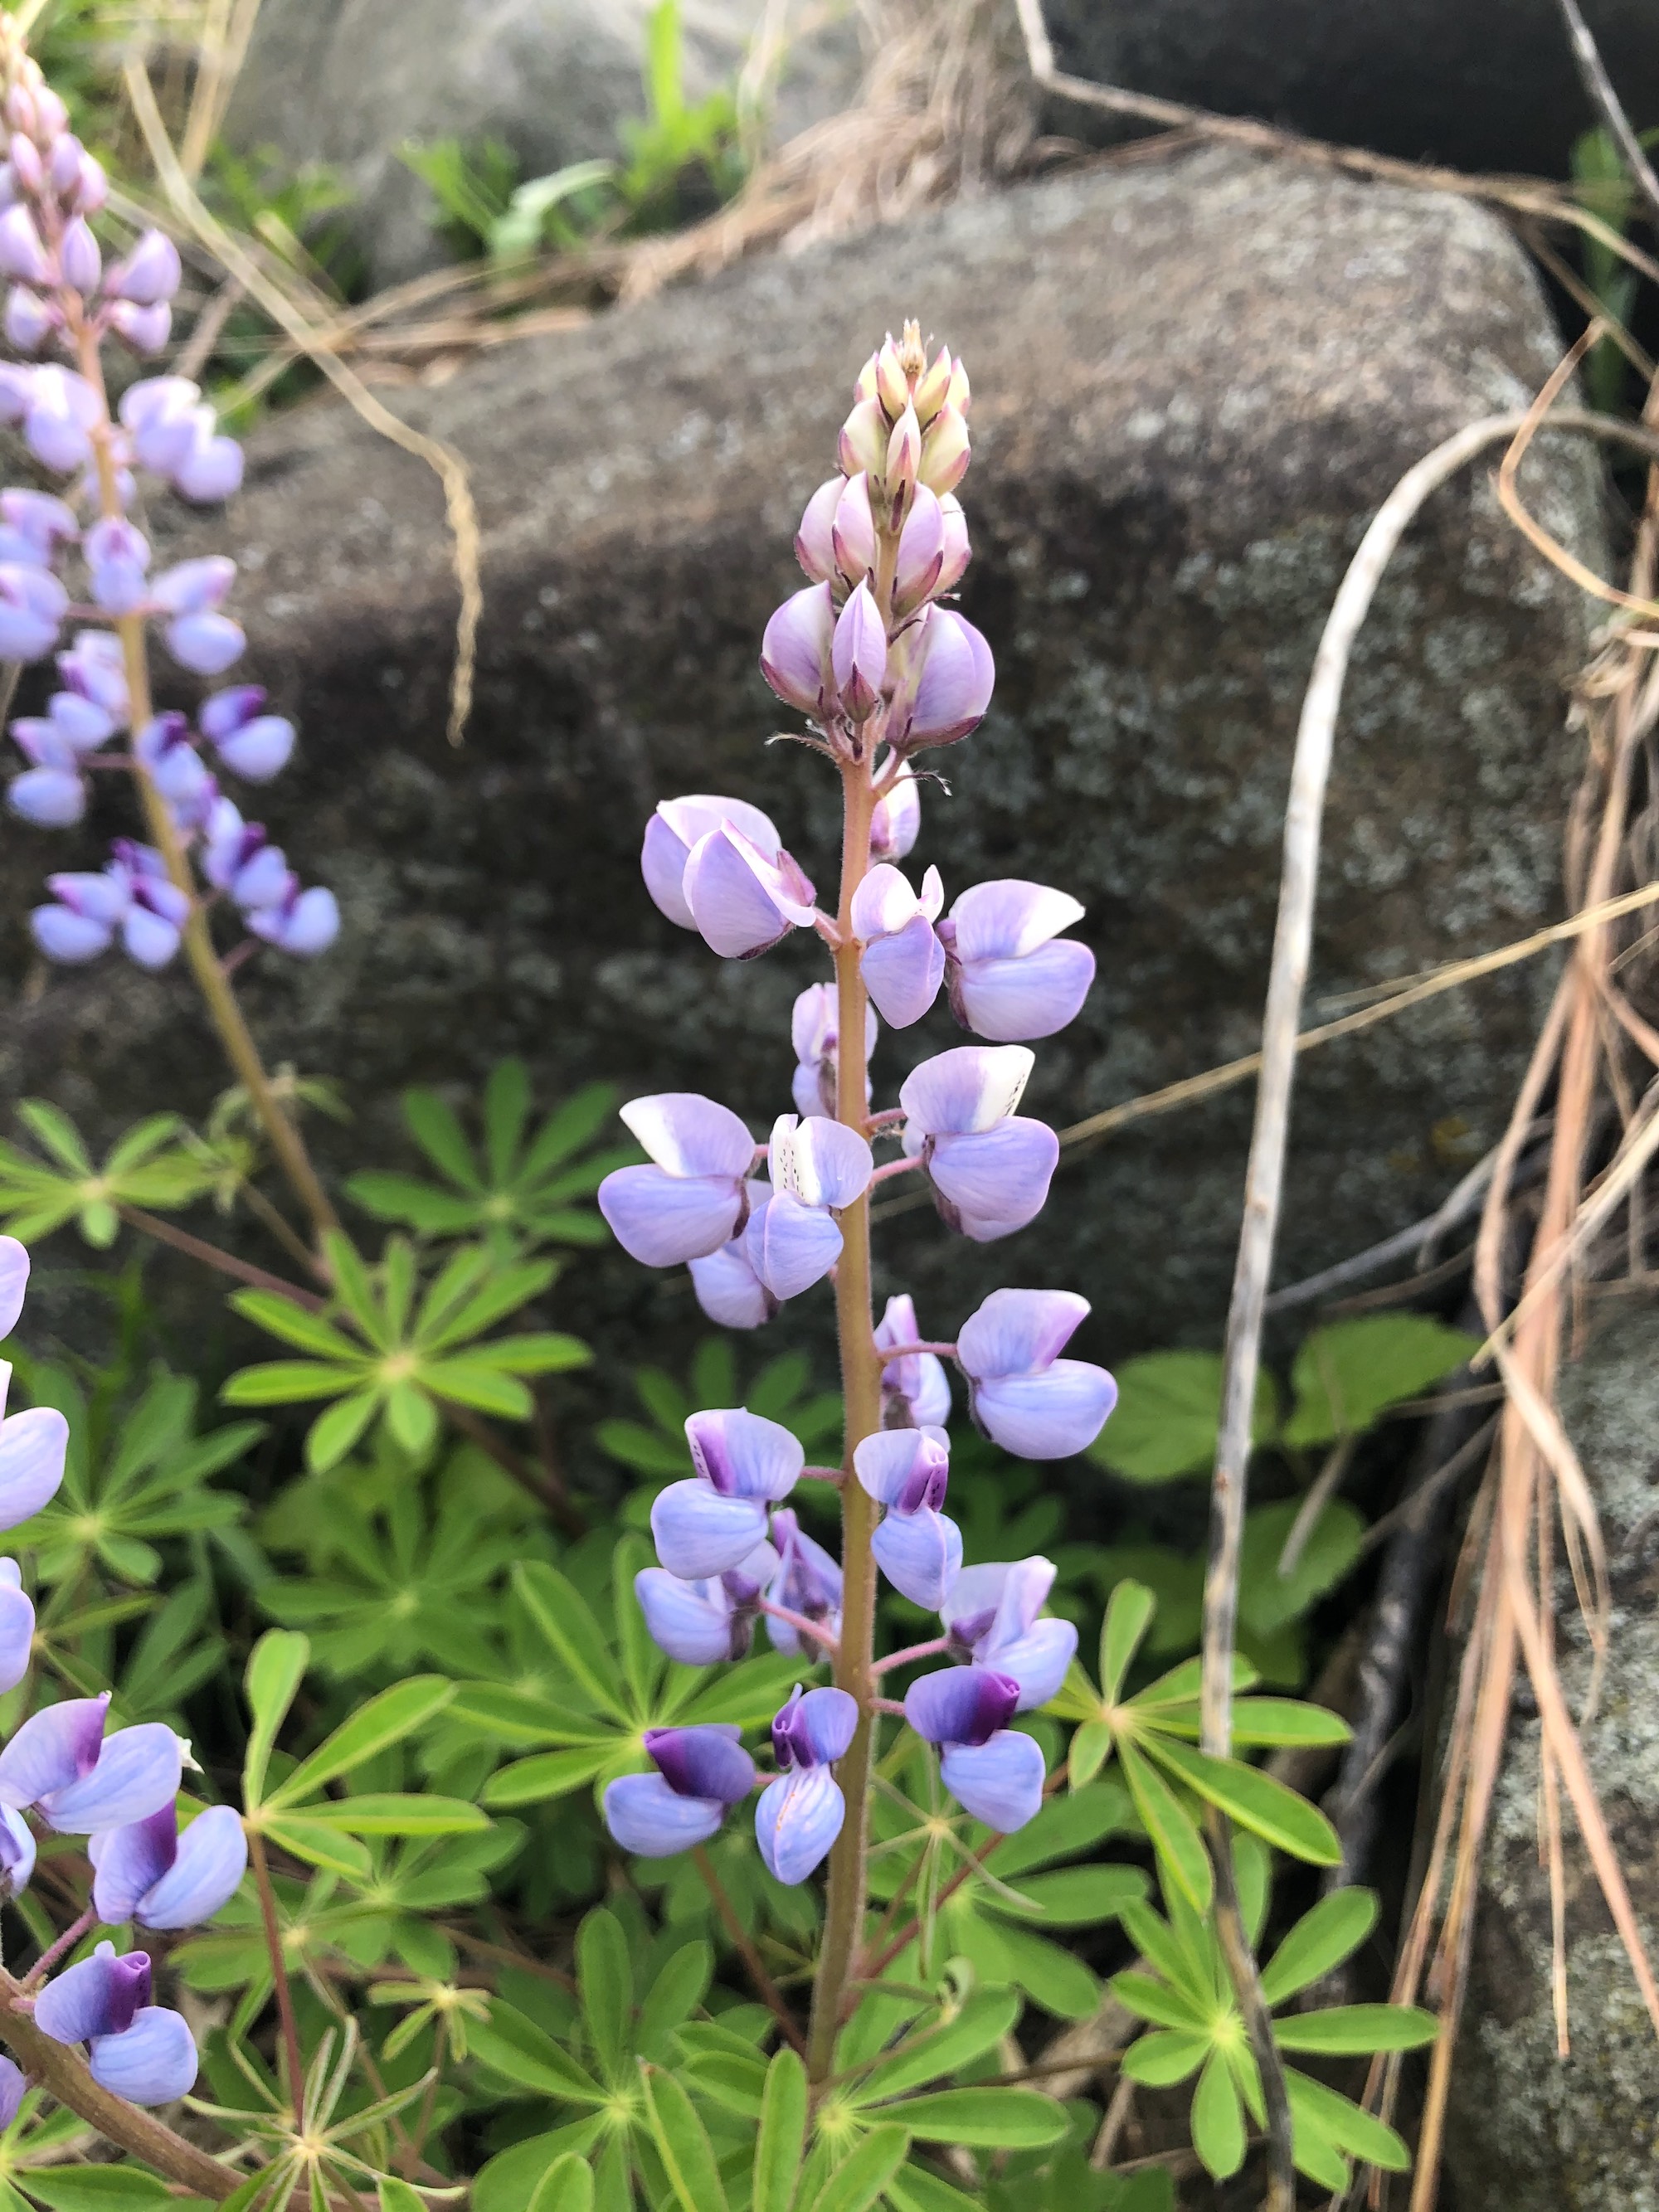 Wild Lupine next to the UW-Madison Arboretum Visitor Center in Madison, Wisconsin on May 17, 2021.